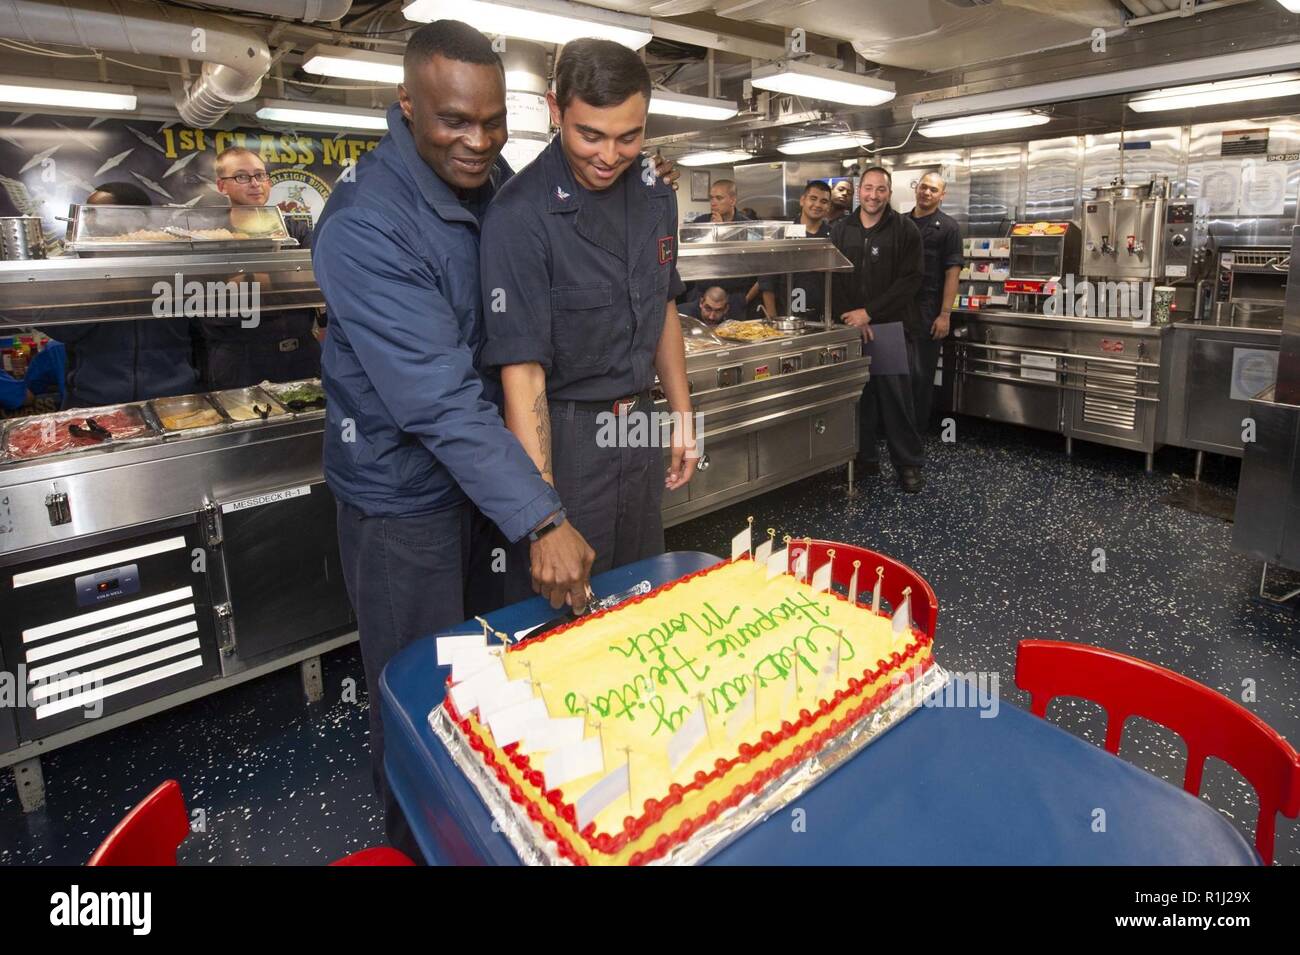 MEDITERRANEAN SEA (Sept. 24, 2018) Cmdr. Errol Robinson, left, commanding officer of the Arleigh Burke-class guided-missile destroyer USS Arleigh Burke (DDG 51), cuts a cake with Fire Controlman 3rd Class Gregory Rivera during a Hispanic Heritage Month observance event on the mess decks Sept. 24, 2018. Arleigh Burke, homeported at Naval Station Norfolk, is conducting naval operations in the U.S. 6th Fleet area of operations in support of U.S. national security interests in Europe and Africa. Stock Photo